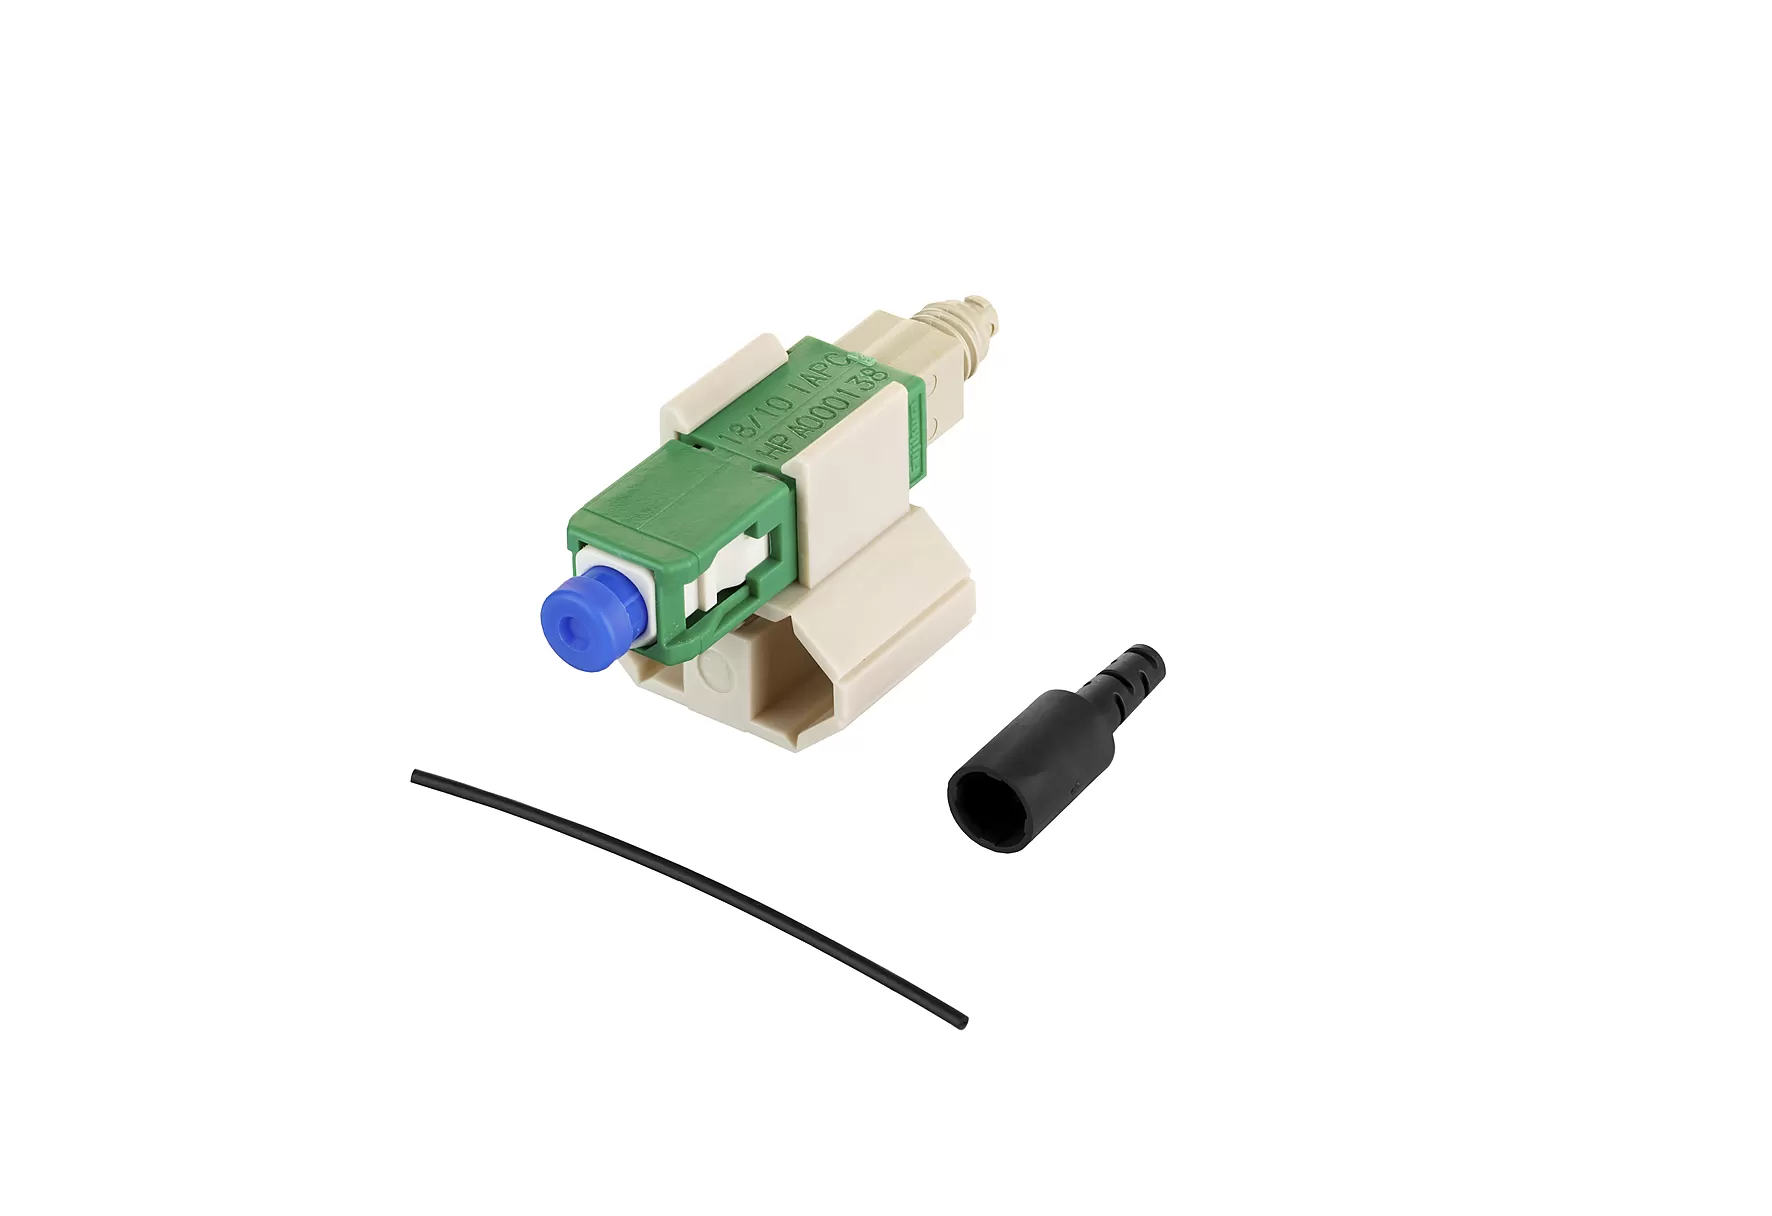 Metz Connect OpDAT FAST Hybrid Steckerbausatz SC APC OS2 10 Stück für Adern Ø 0,25 + 0,9 mm 1509QAEA0010-E